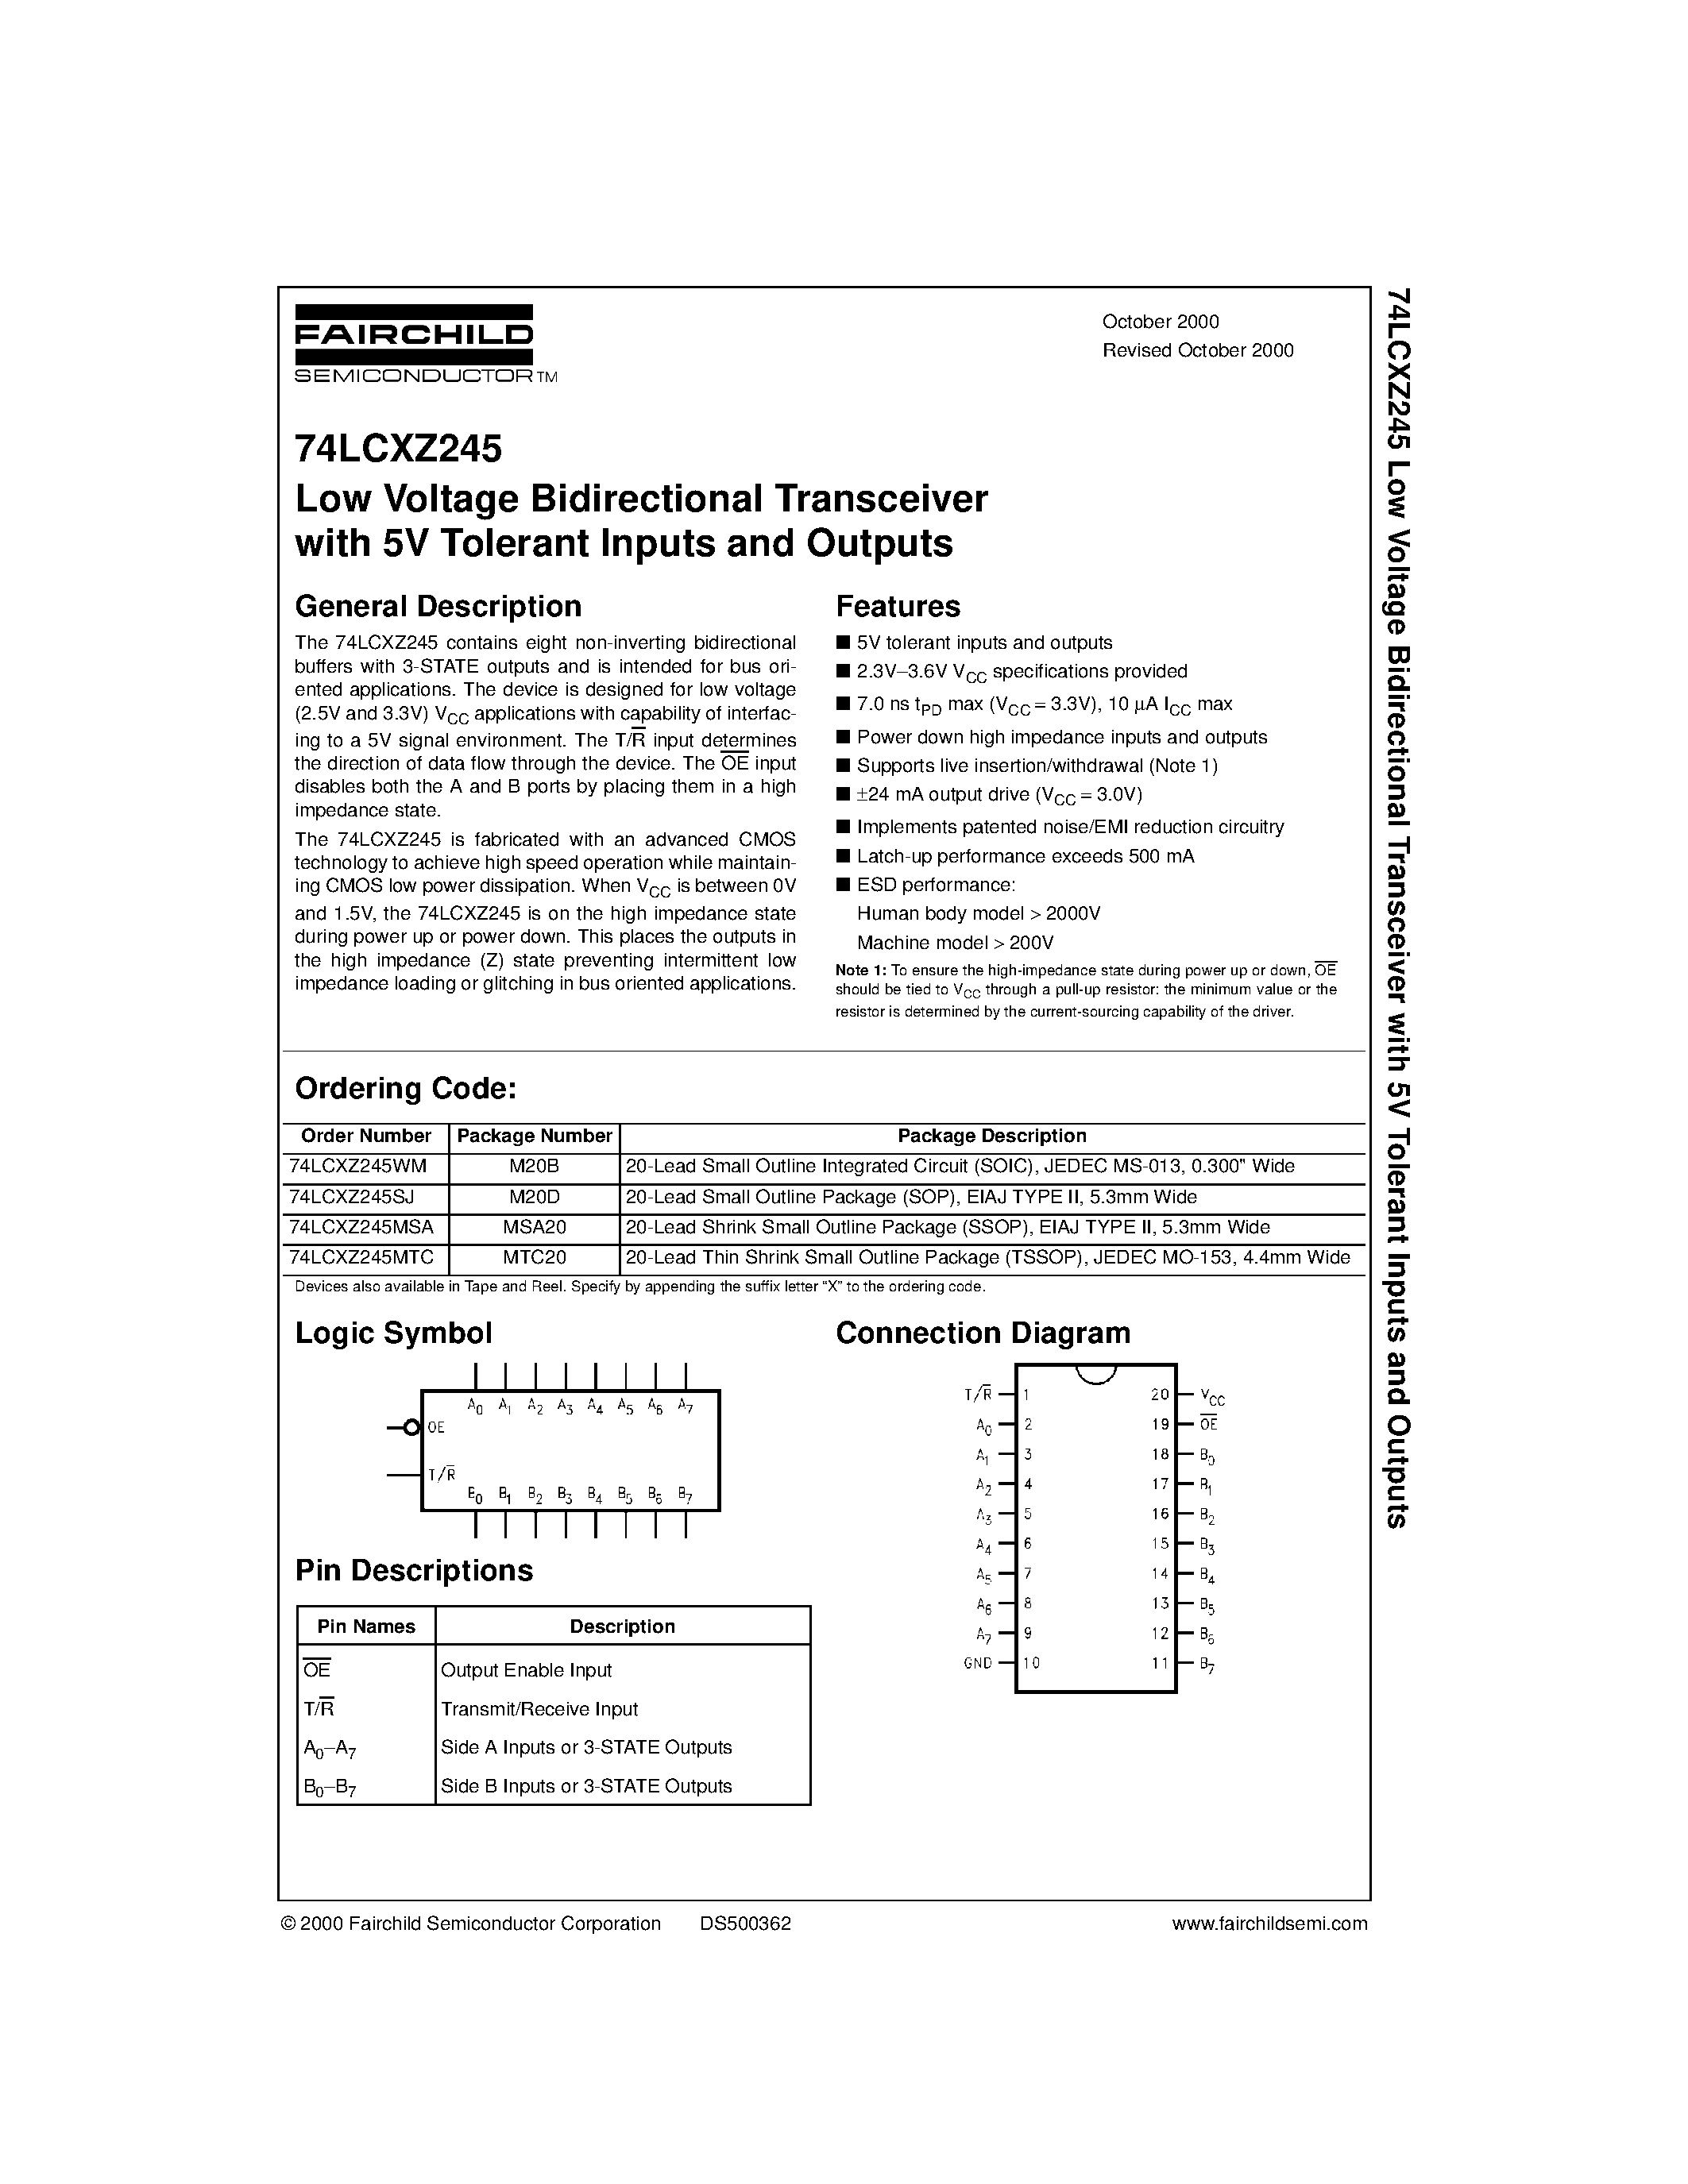 Datasheet 74LCXZ245MSA - Low Voltage Bidirectional Transceiver with 5V Tolerant Inputs and Outputs page 1